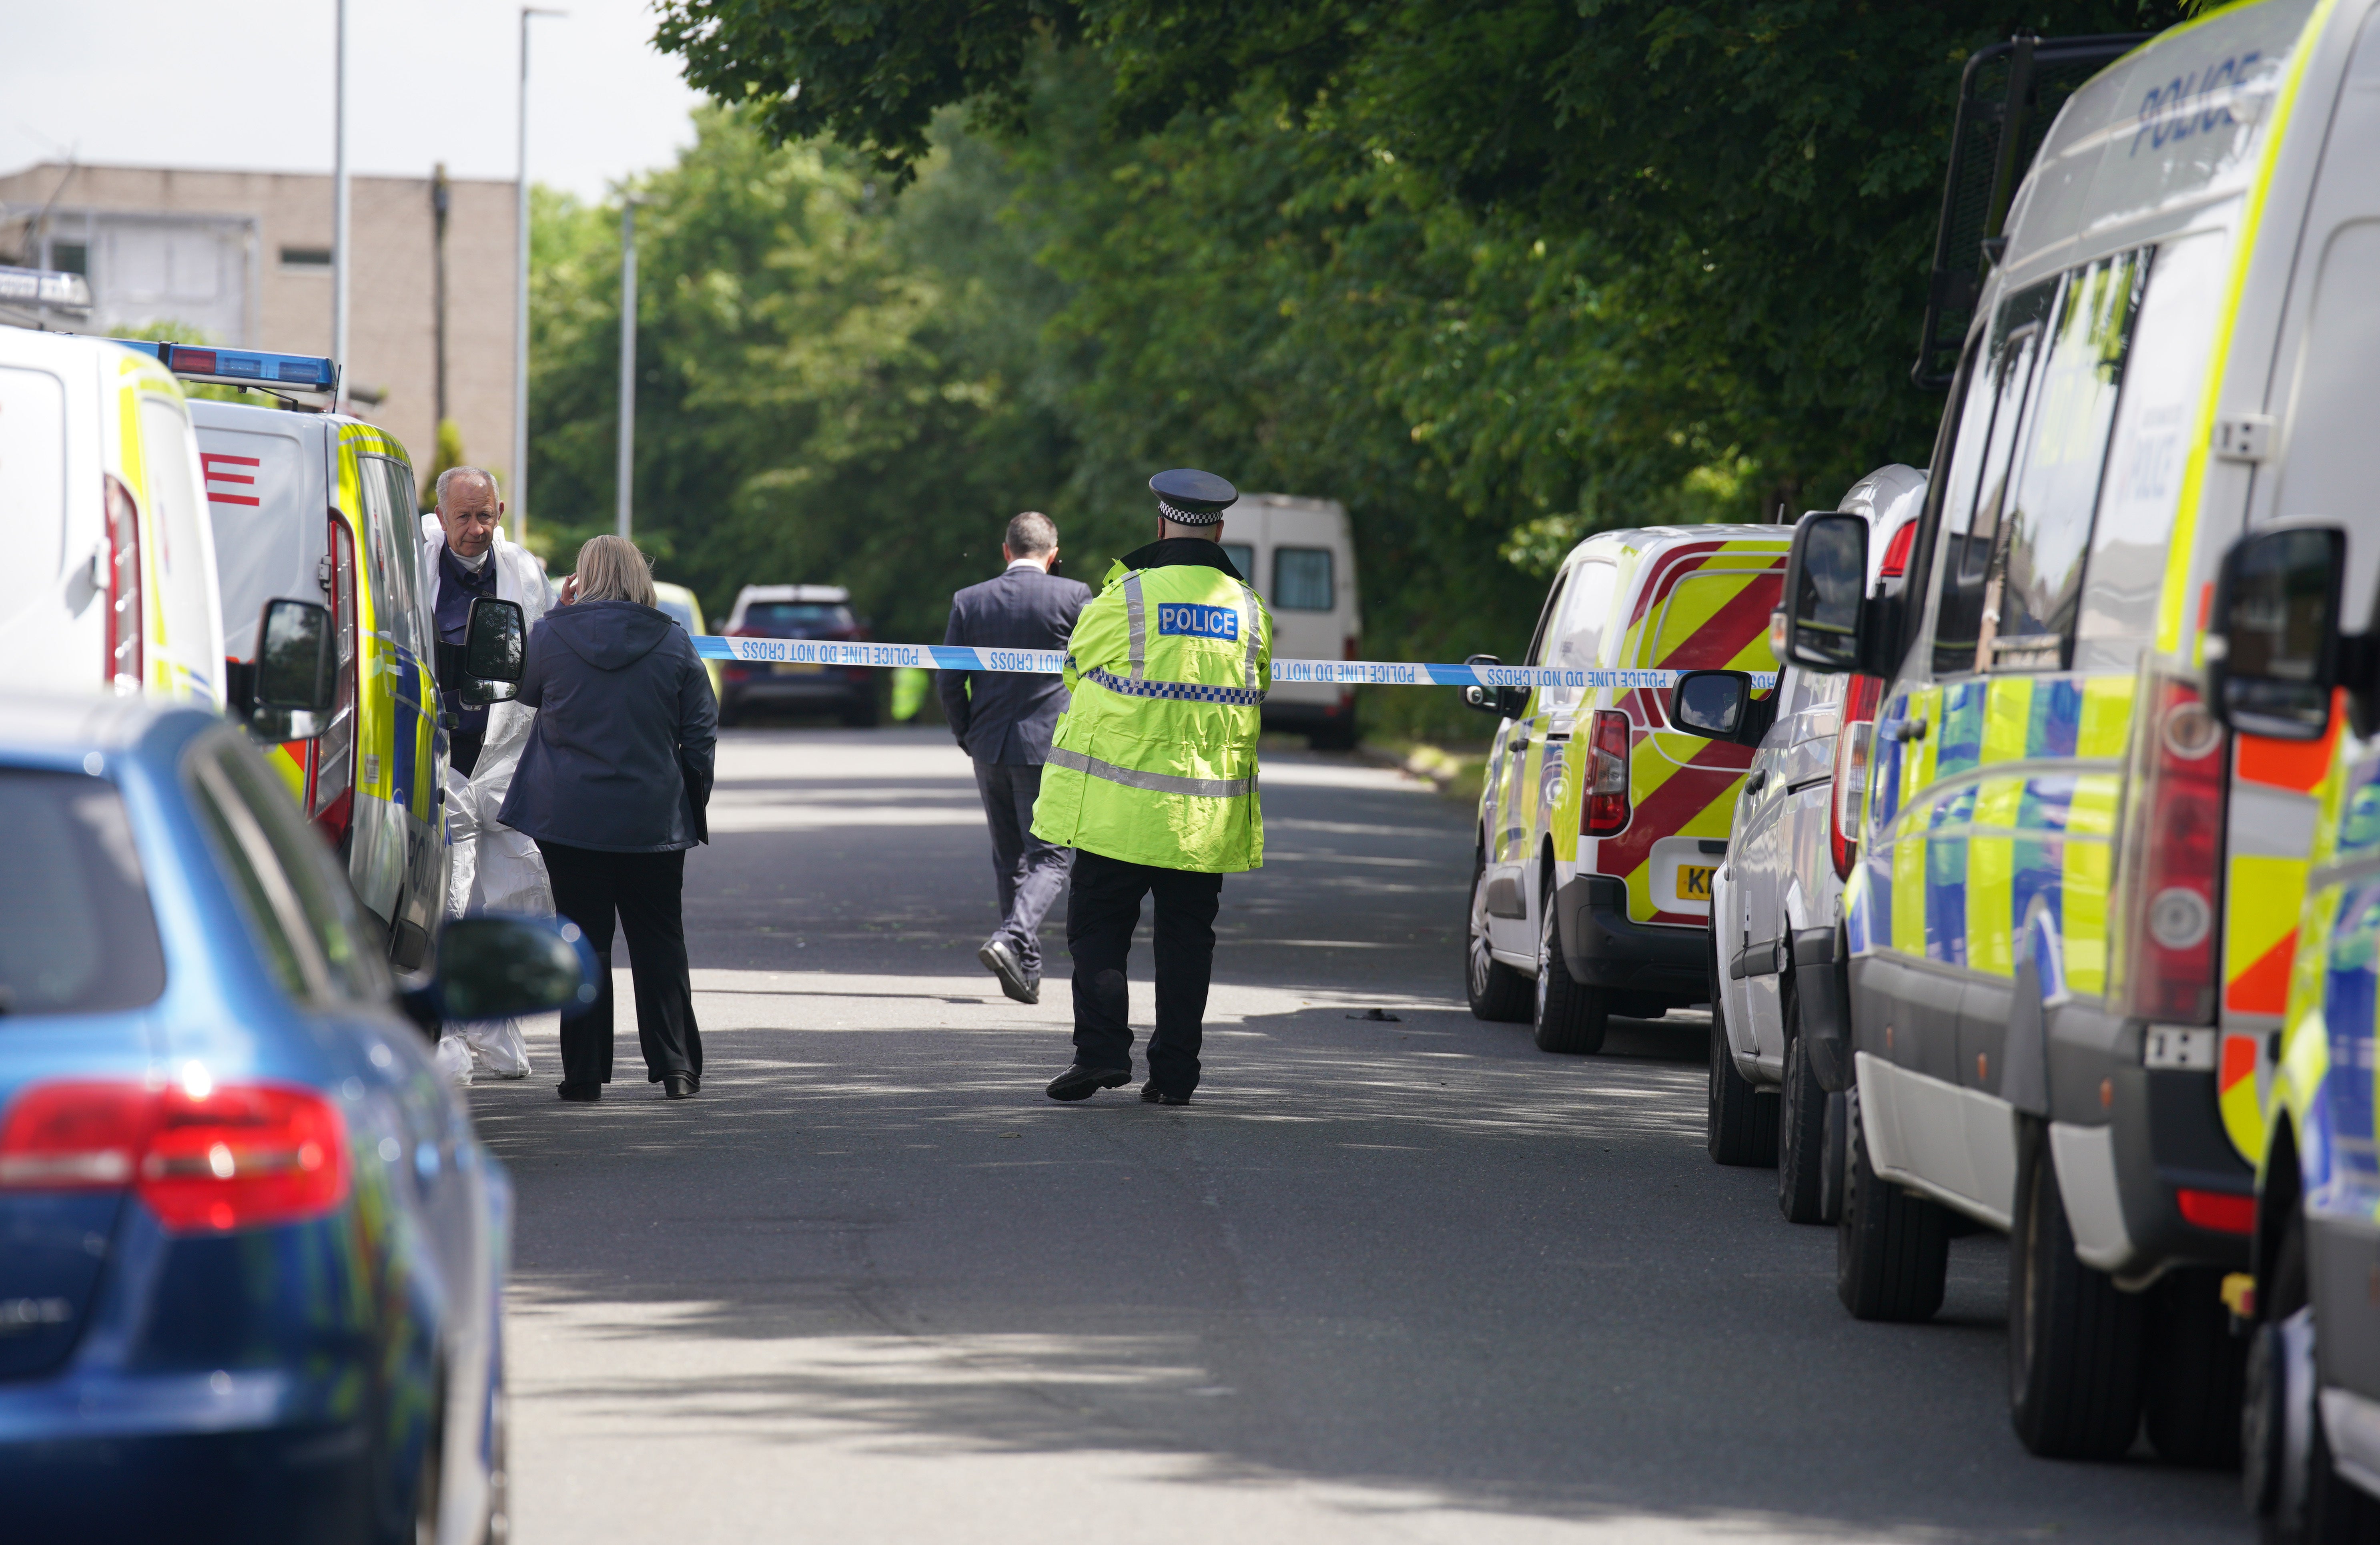 The scene in Miles Platting, Manchester, following the incident (Peter Byrne/PA)